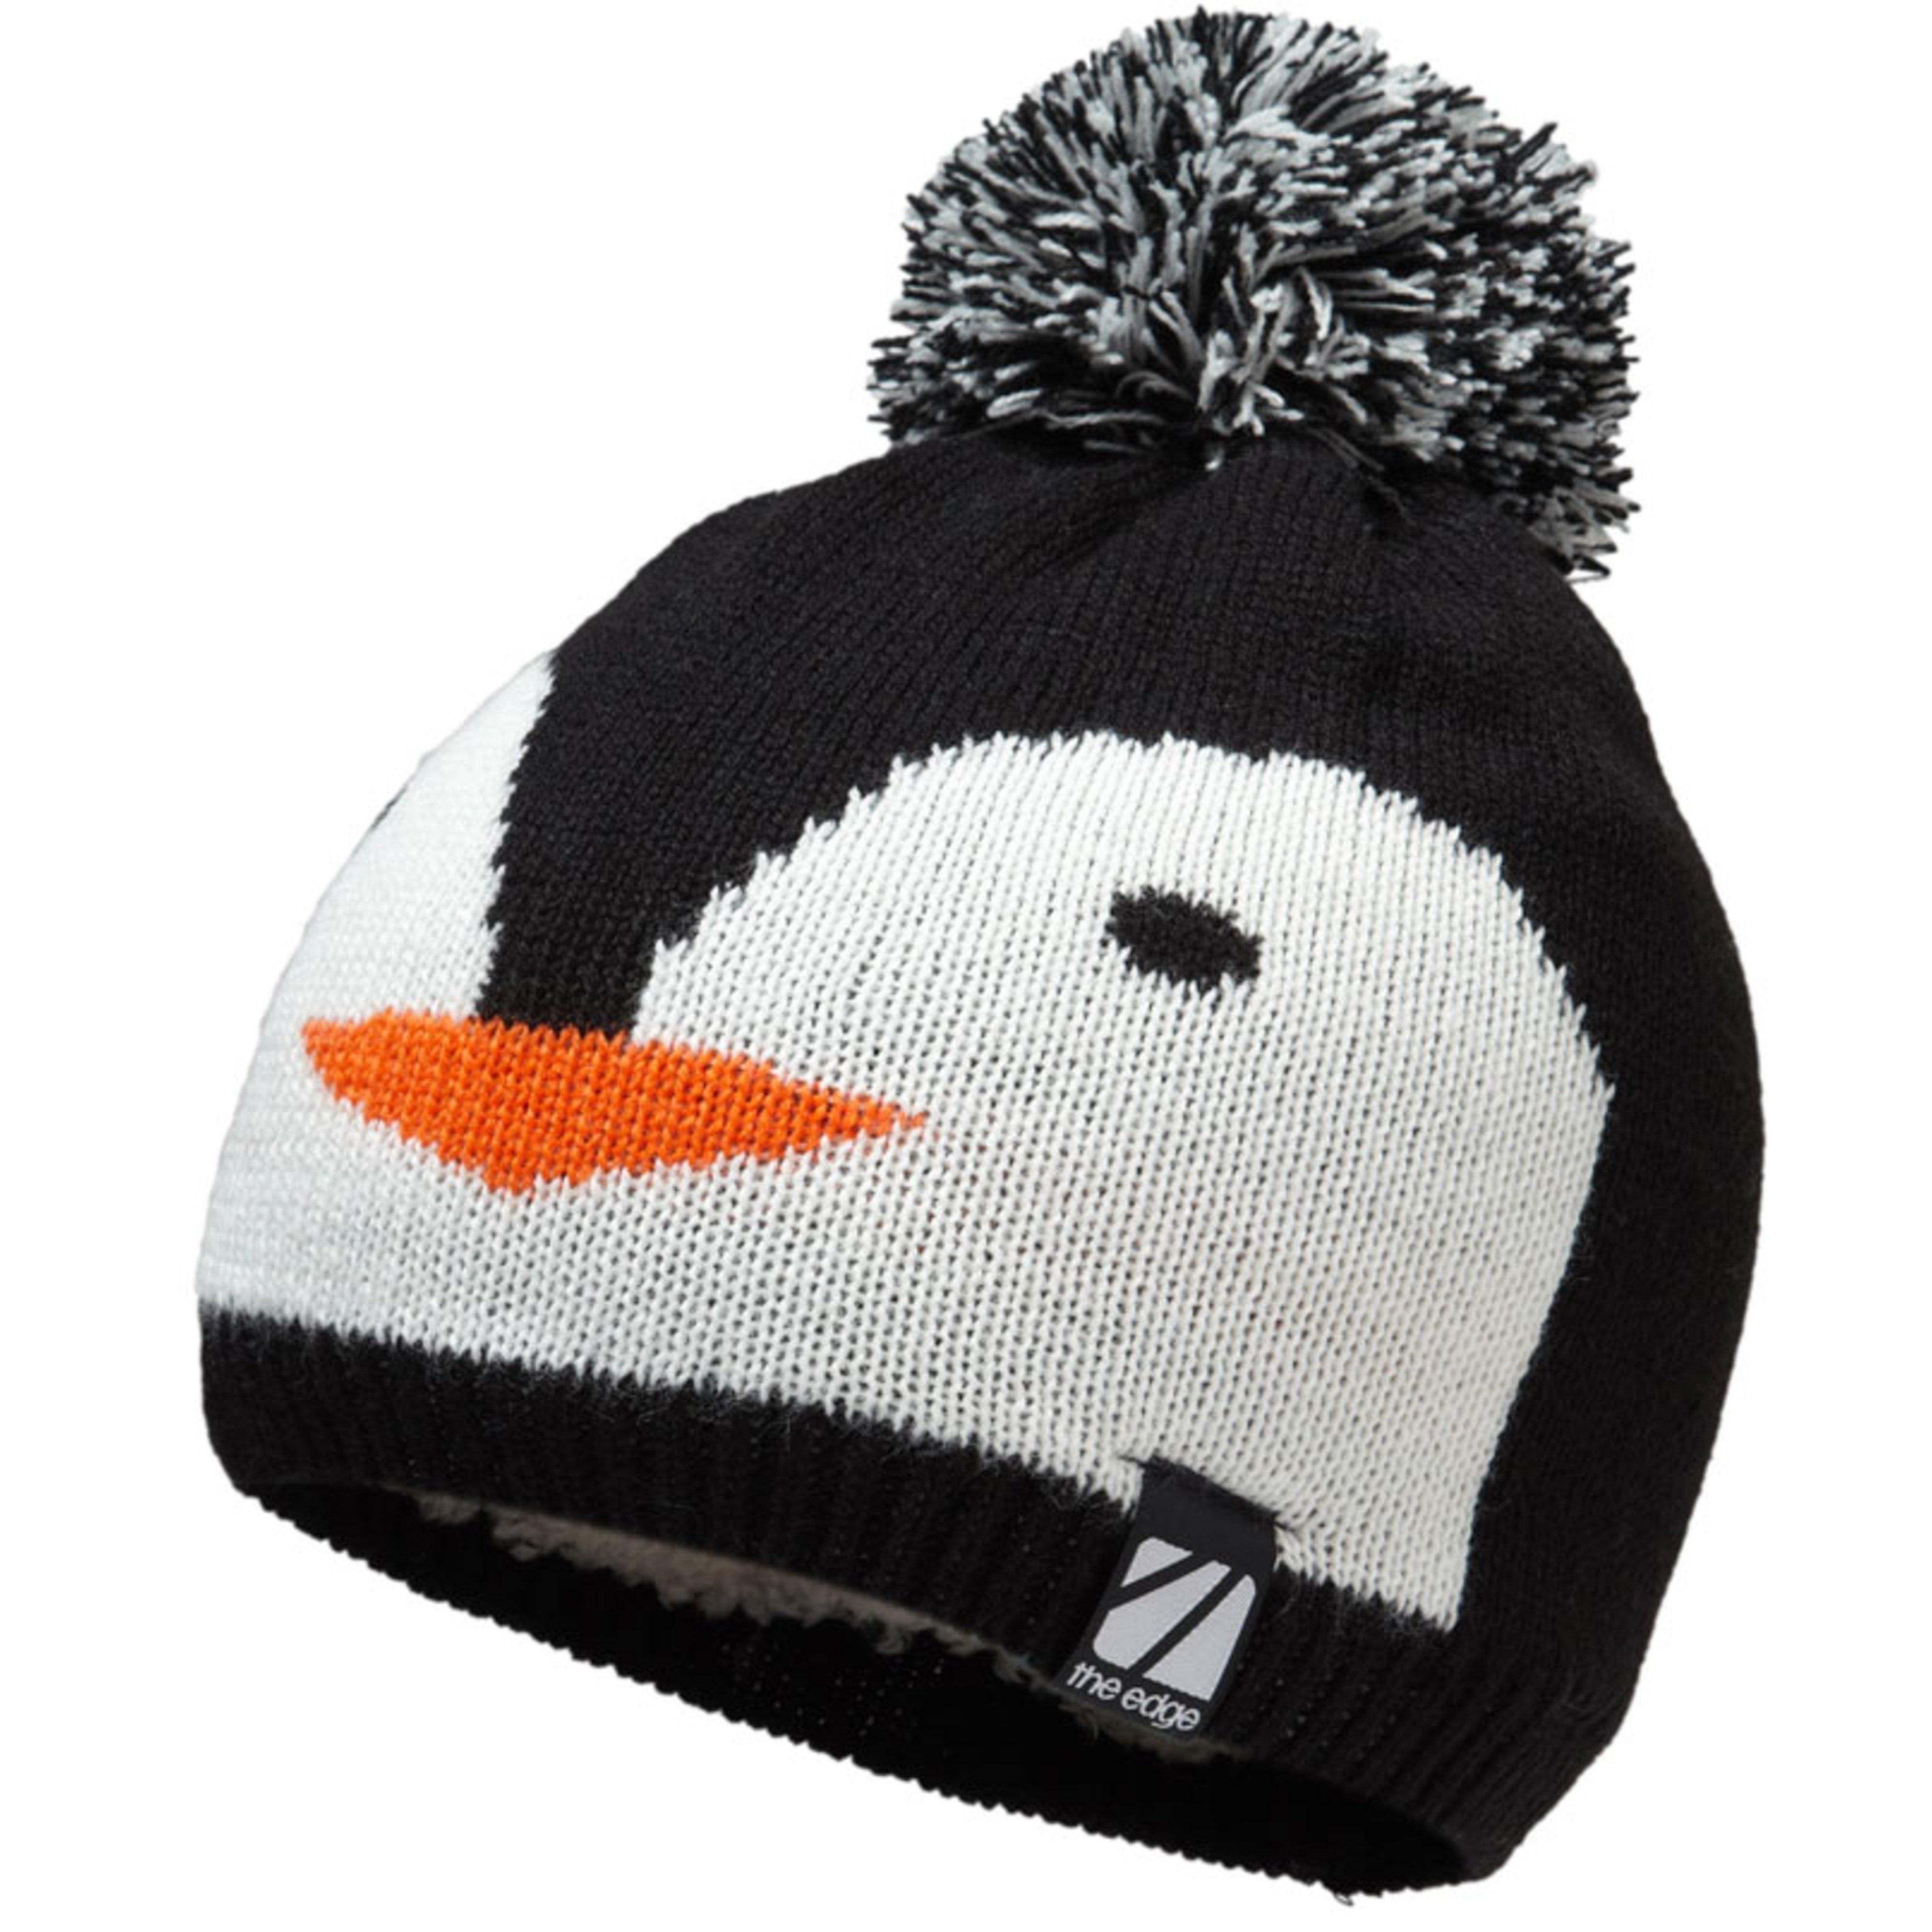 The Edge Character Beanie Review